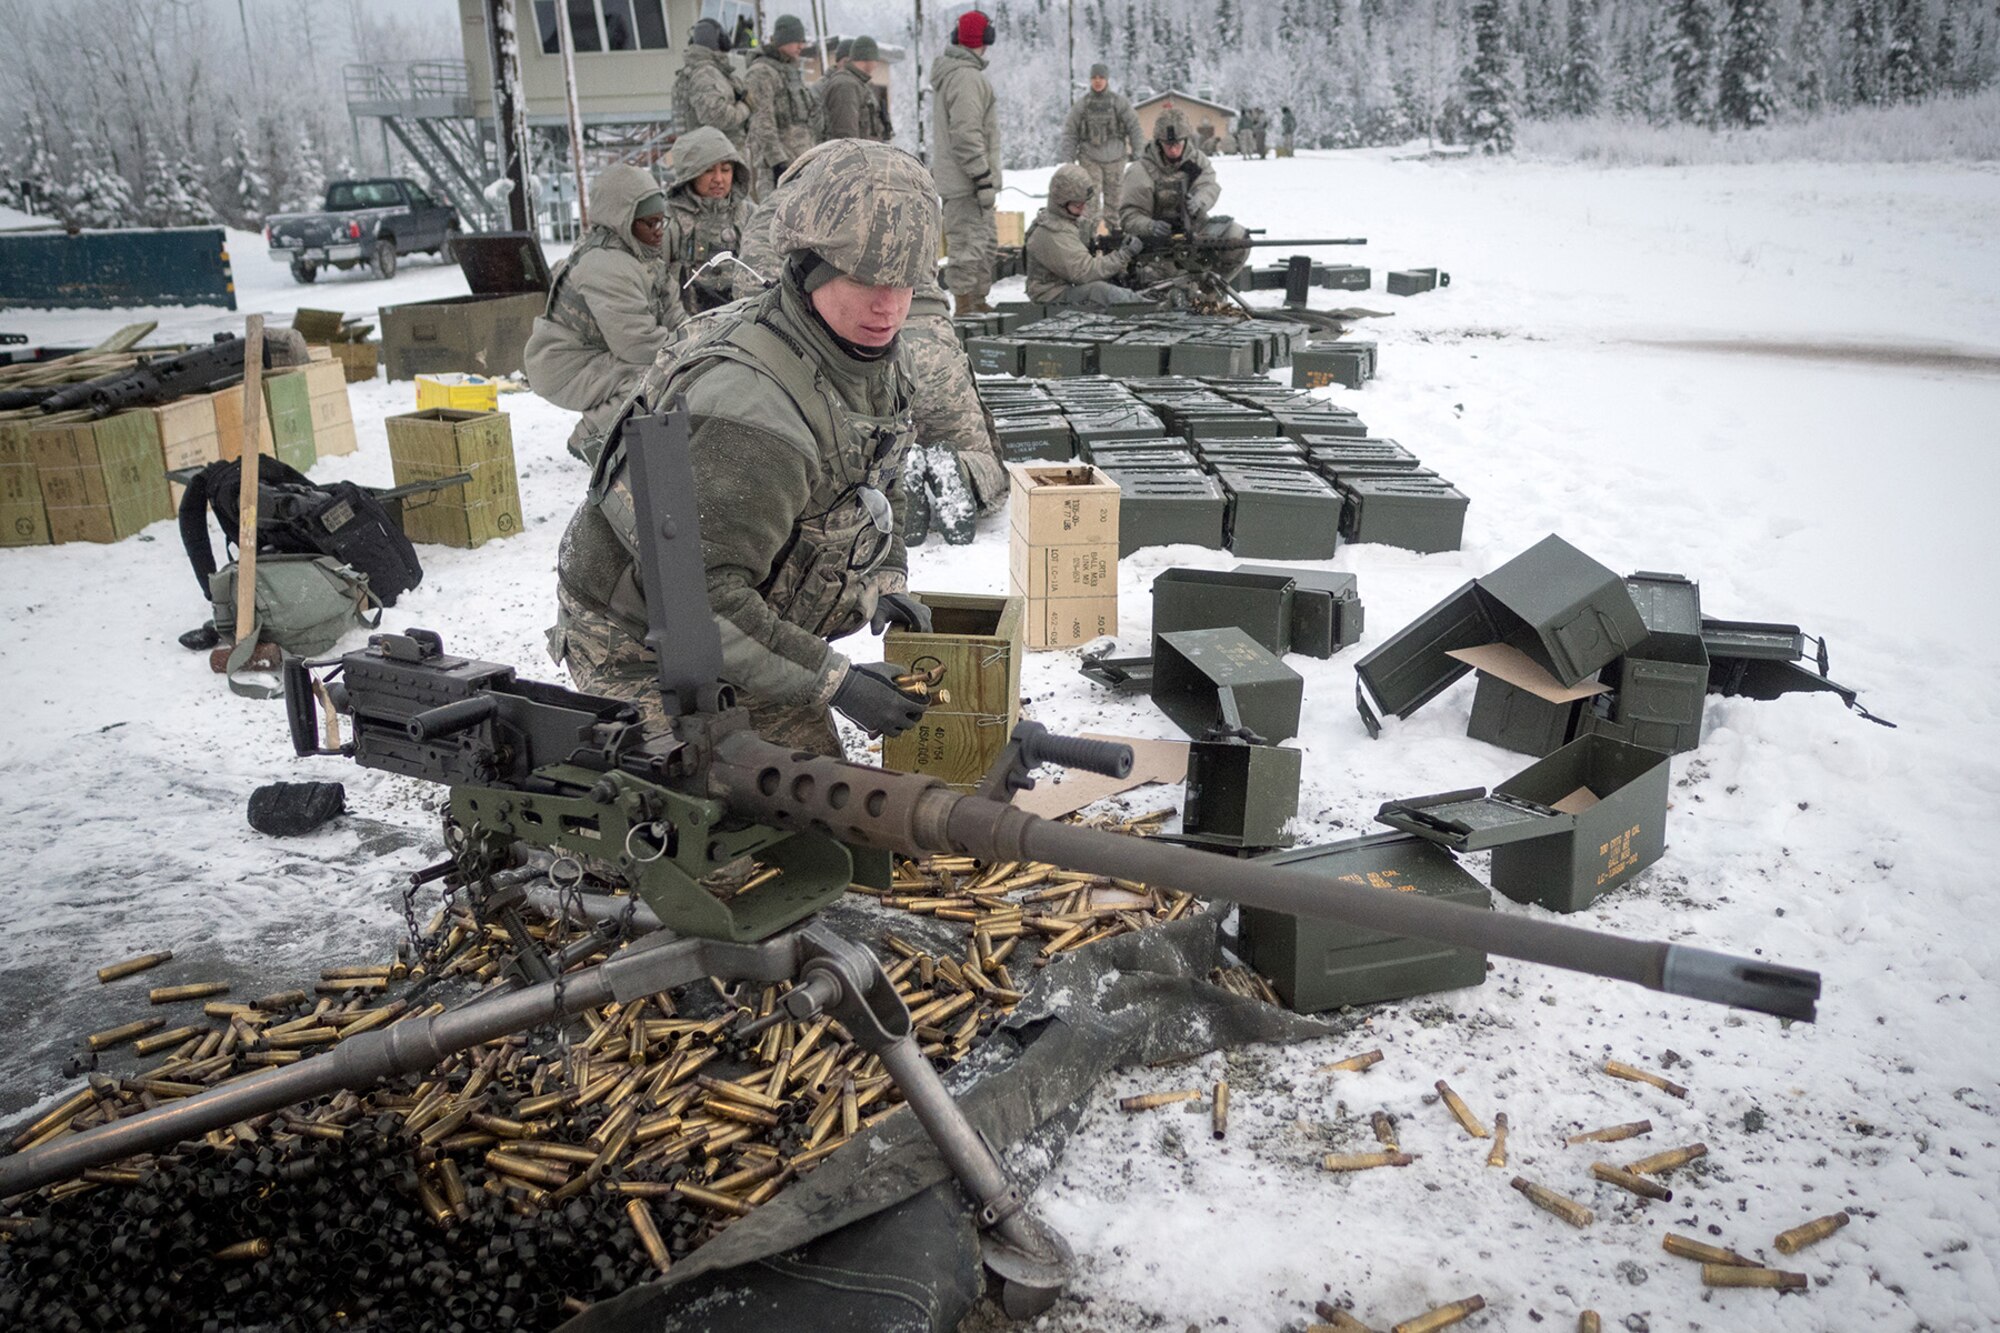 Airman 1st Class Robert Boyer, assigned to the 673d Security Forces Squadron, picks up expended .50 caliber casings after conducting an M249 Squad Automatic Weapon, and M2 .50 Caliber machine gun qualification range on Joint Base Elmendorf-Richardson, Alaska, Jan. 10, 2018. Security Forces Airmen perform extensive training in law enforcement as well as combat tactics to protect U.S. Military bases and assets both stateside and overseas.